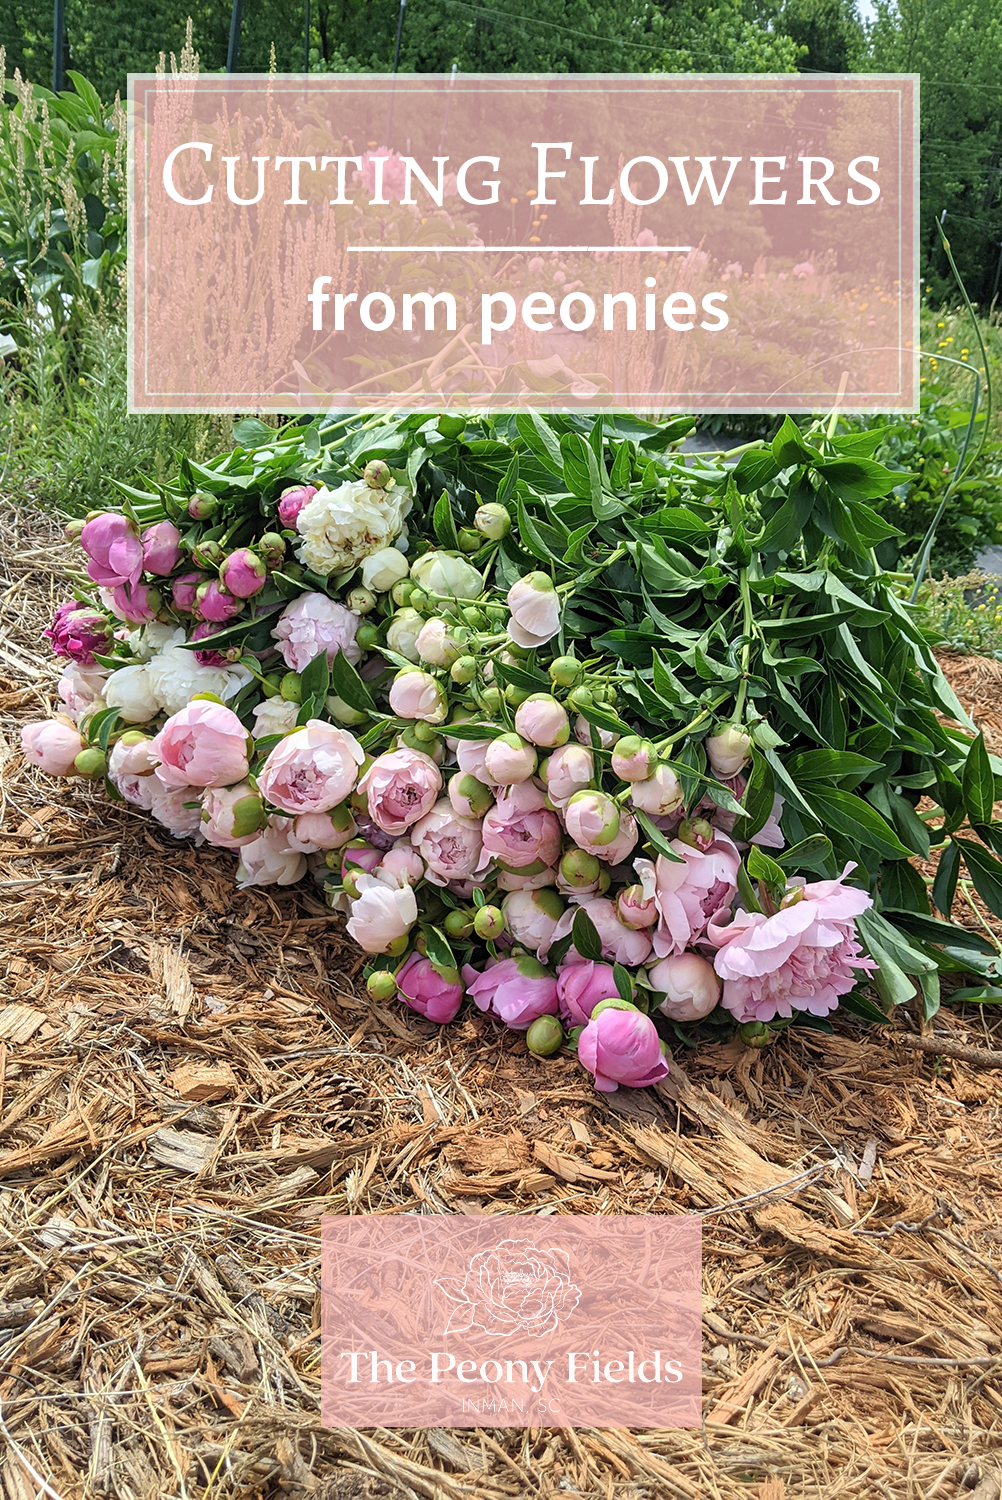 Cutting Flowers from Peonies. A pile of pink and white cut peonies lies on mulch.